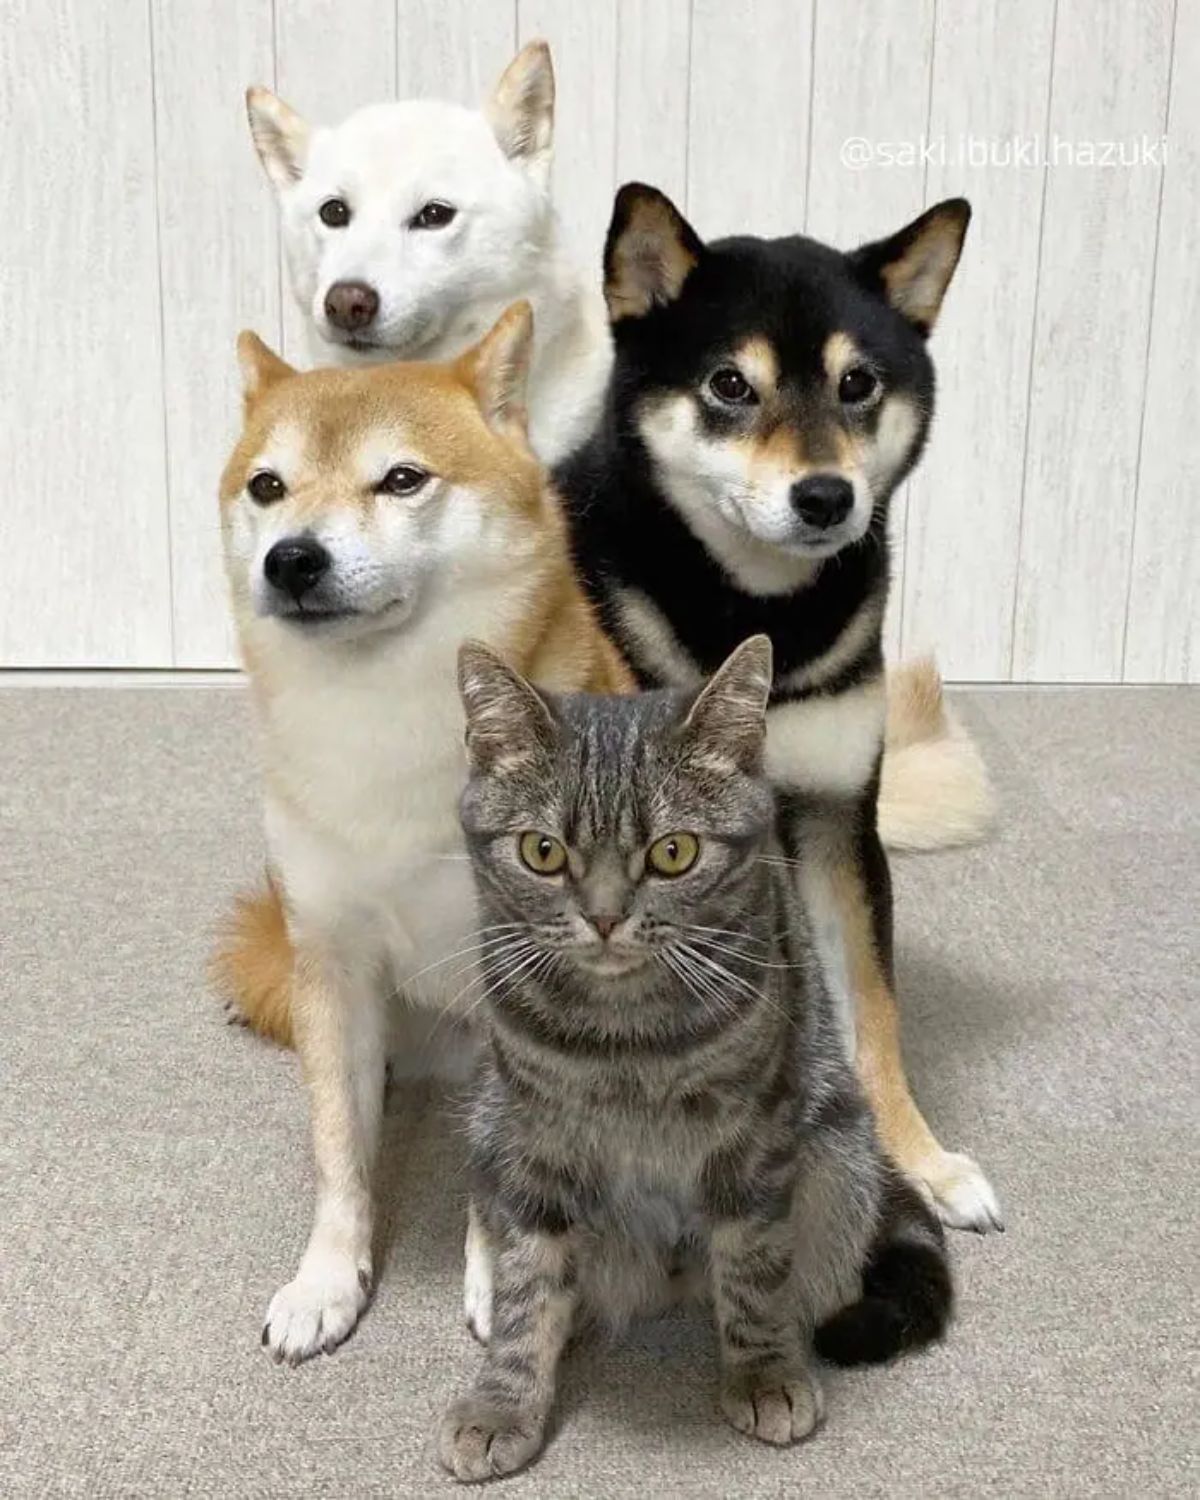 grey tabby sitting in front of brown and black shiba inus with a white shiba inu behind them